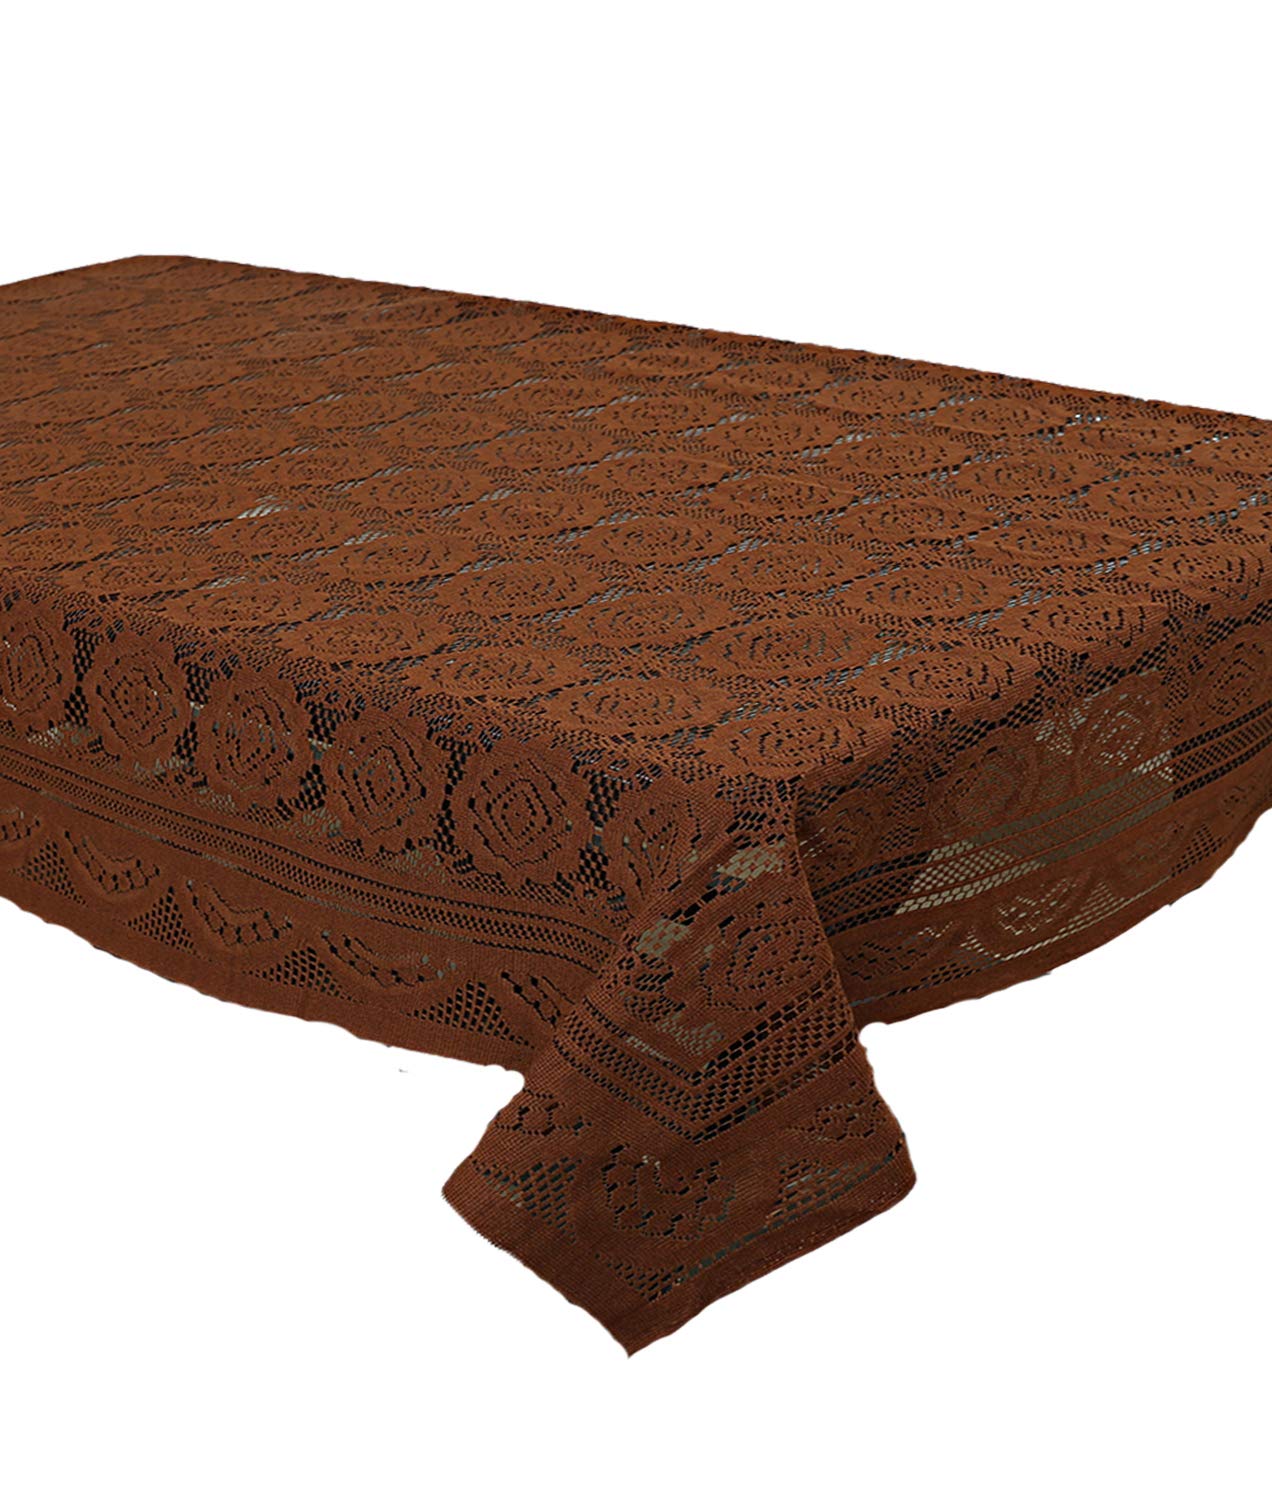 Kuber Industries Center Table Cover|Cotton Center Table Cover for Living Room|Table Cloth for 4 Seater|Circle Design|Brown